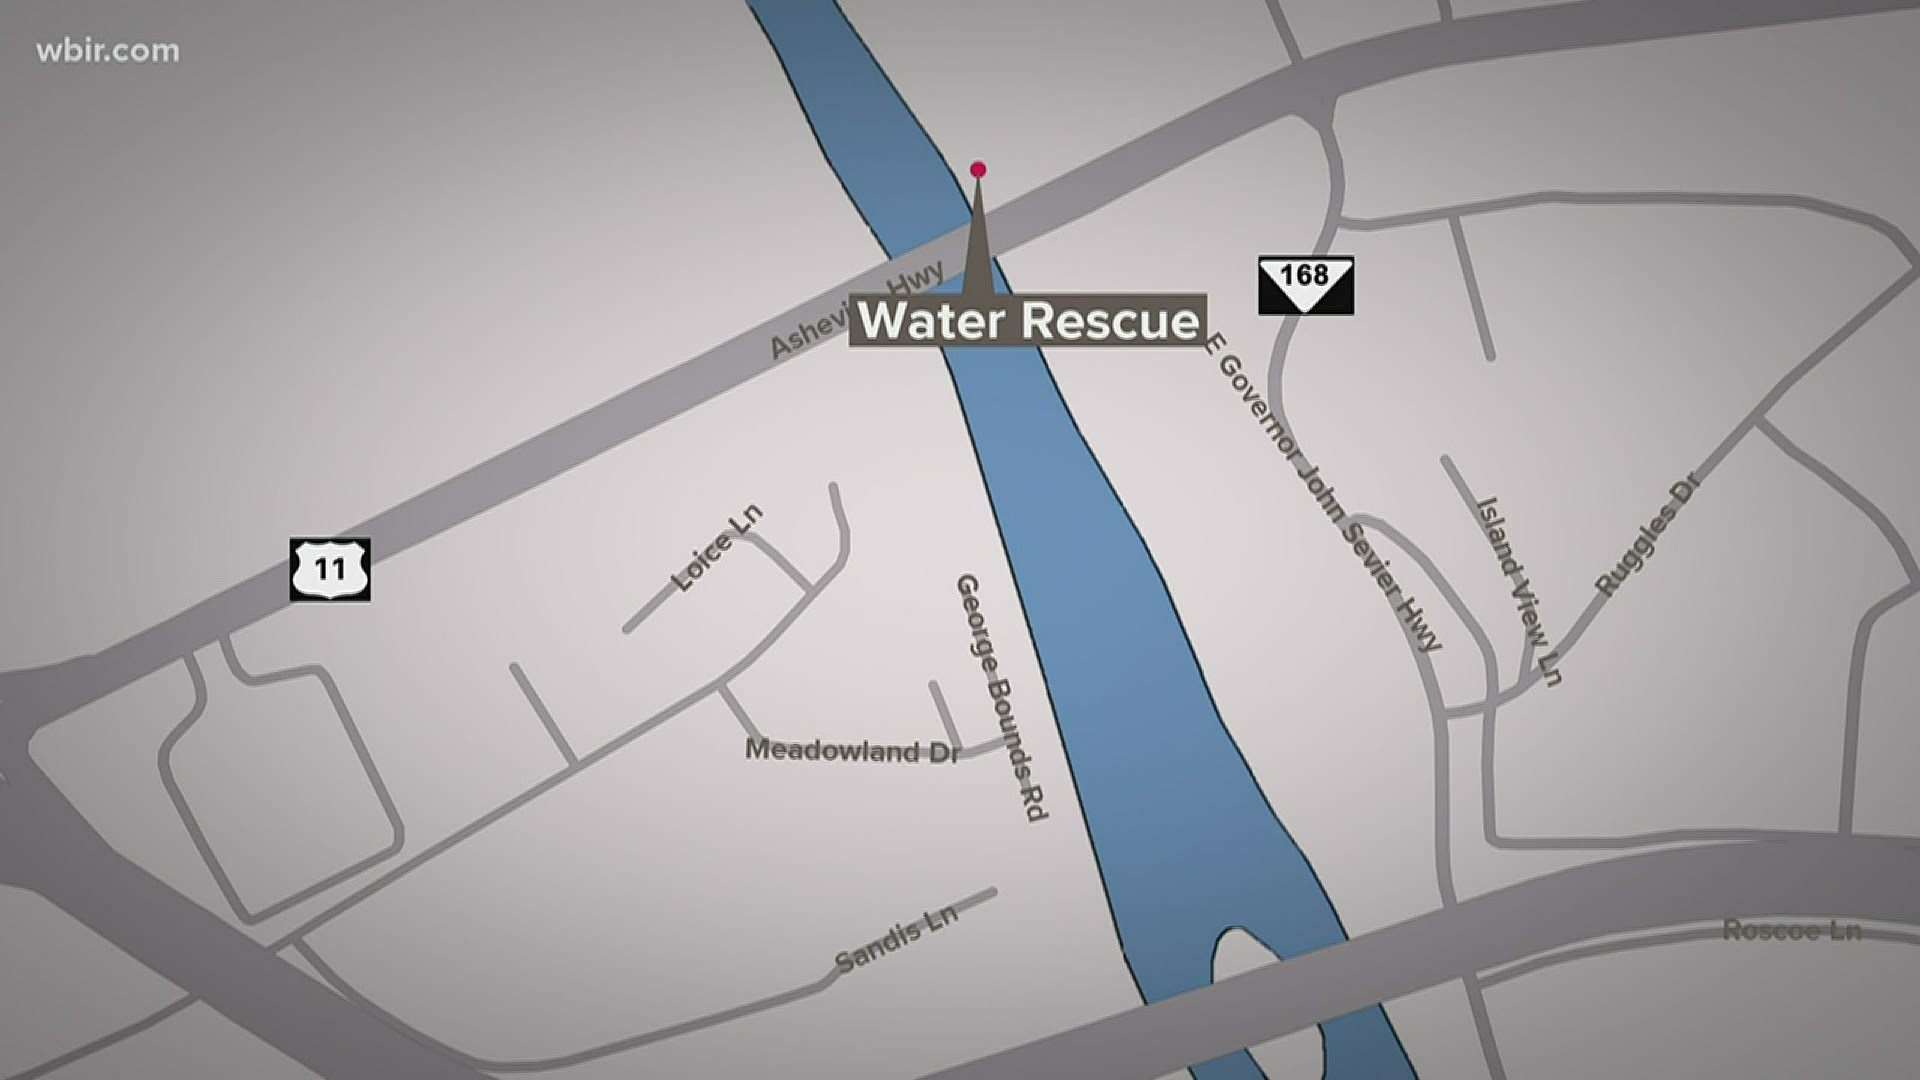 Dispatchers received a call from a woman saying she was intoxicated and hanging off her jet ski in the Holston River.